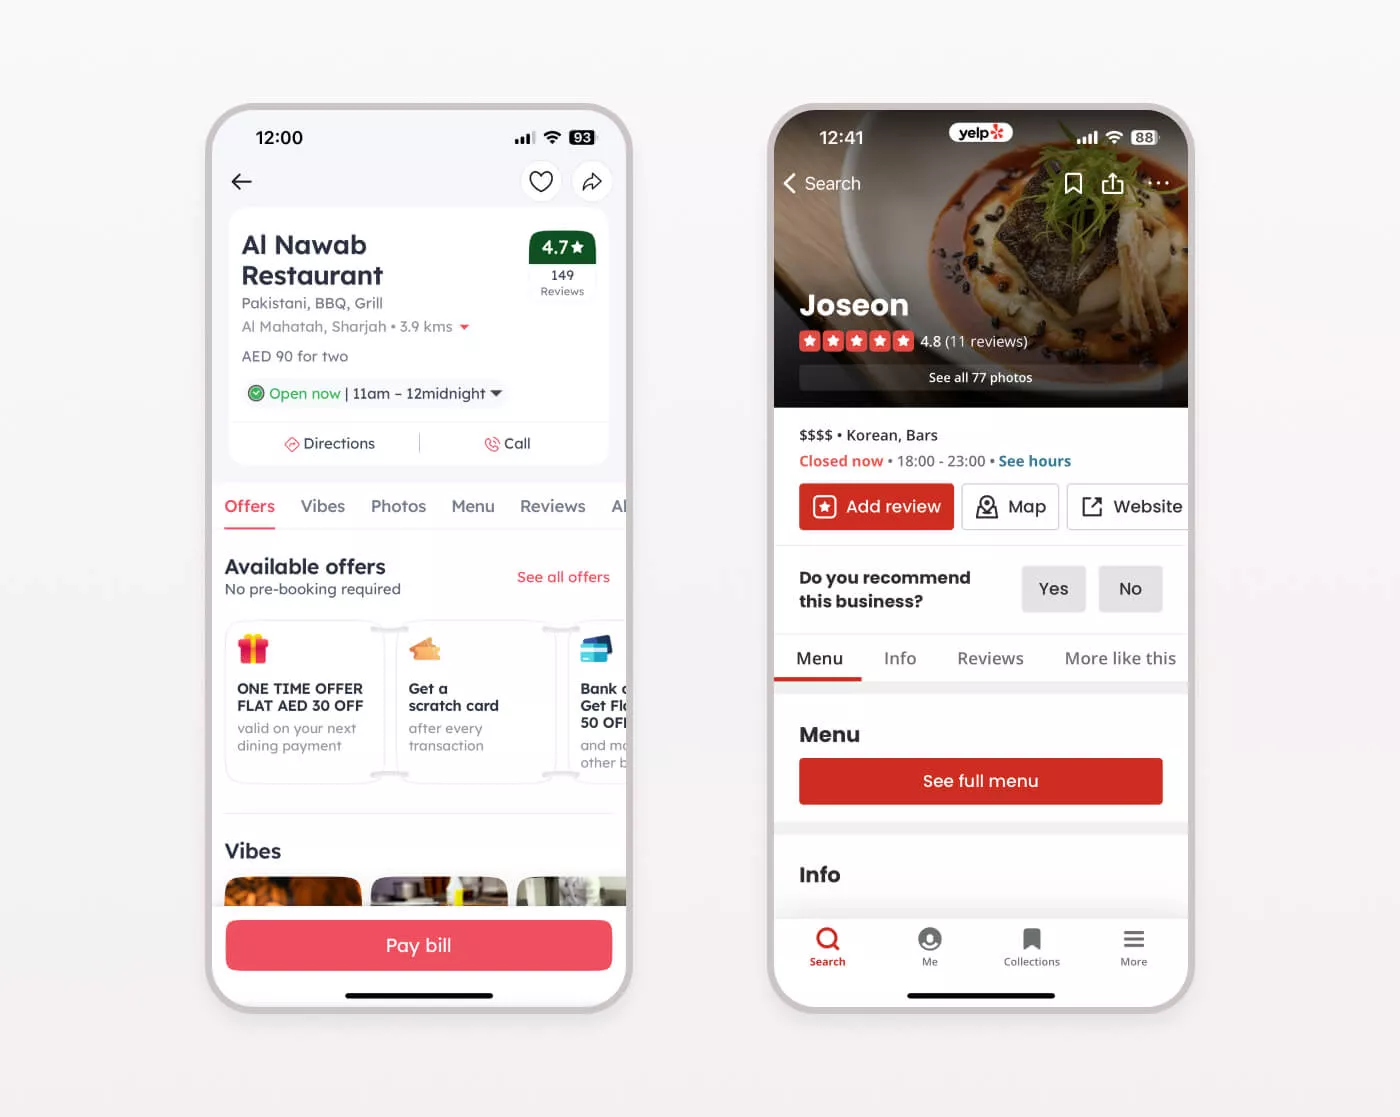 Restaurant profile in the app like Yelp